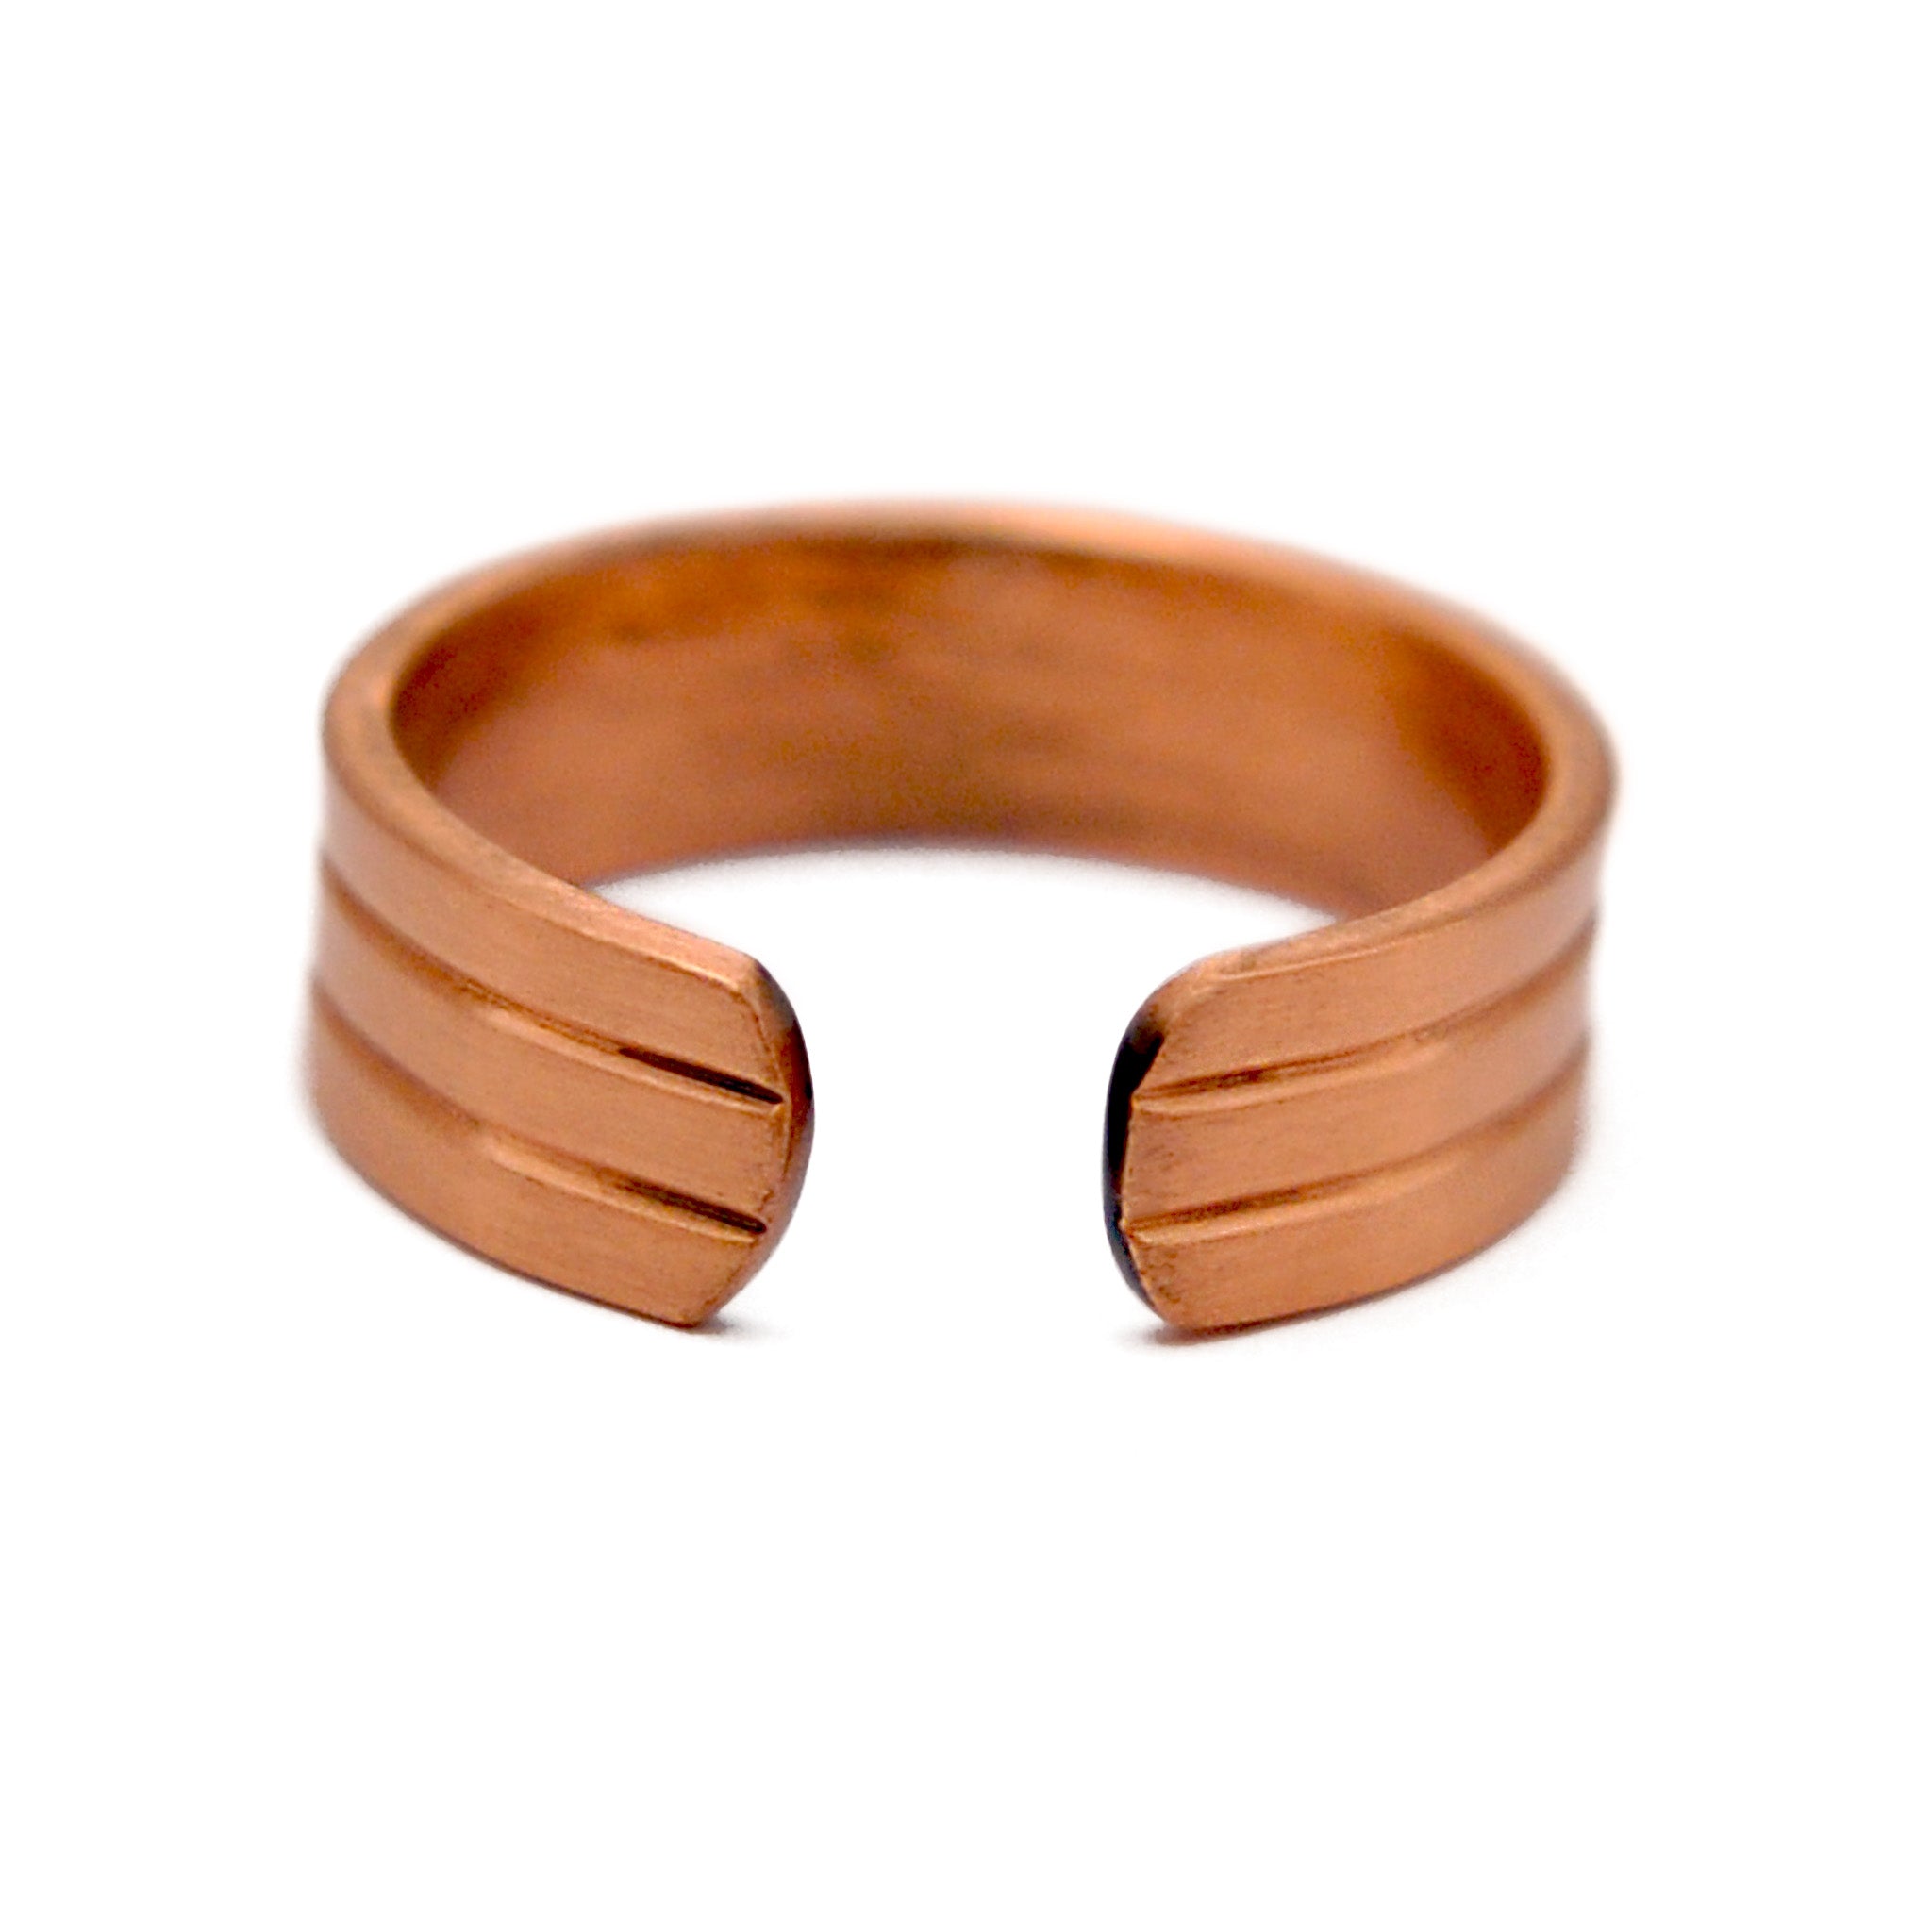 Copper ring for pain